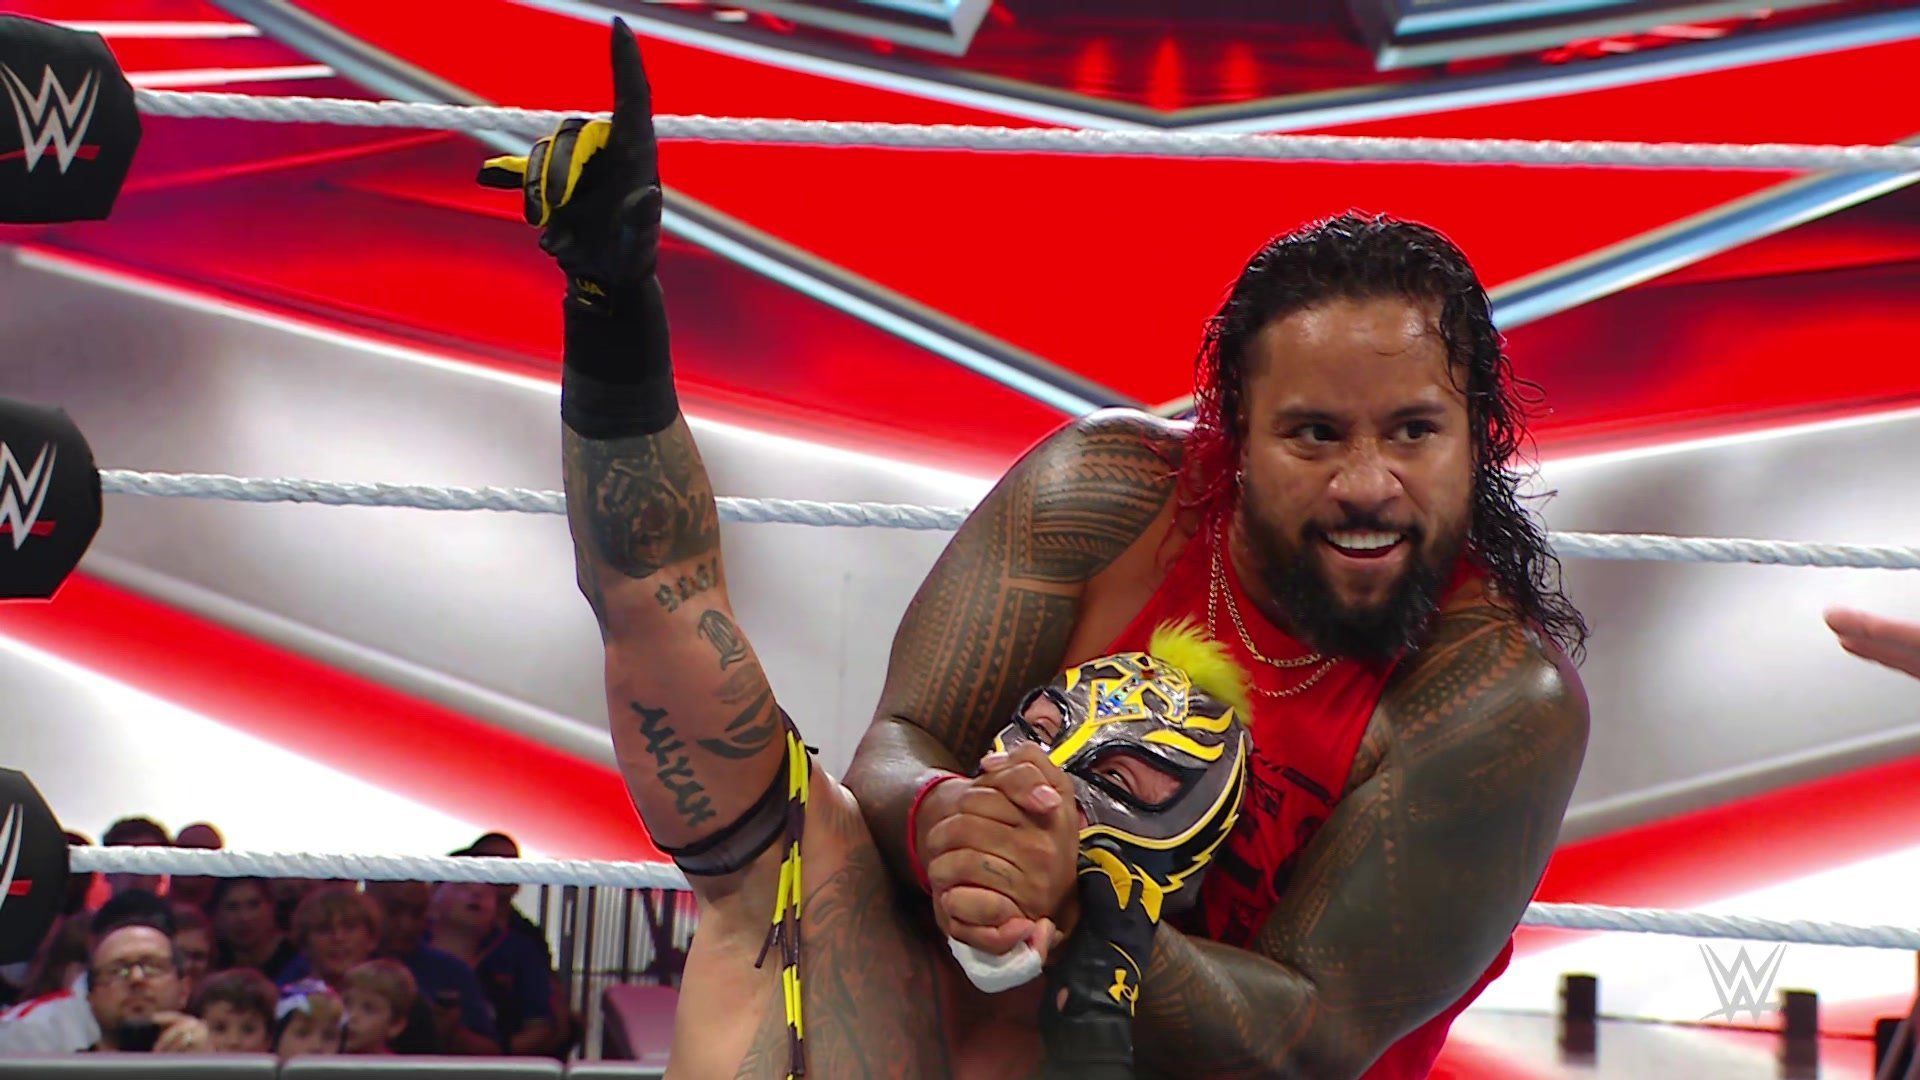 Jimmy Uso and Rey Mysterio